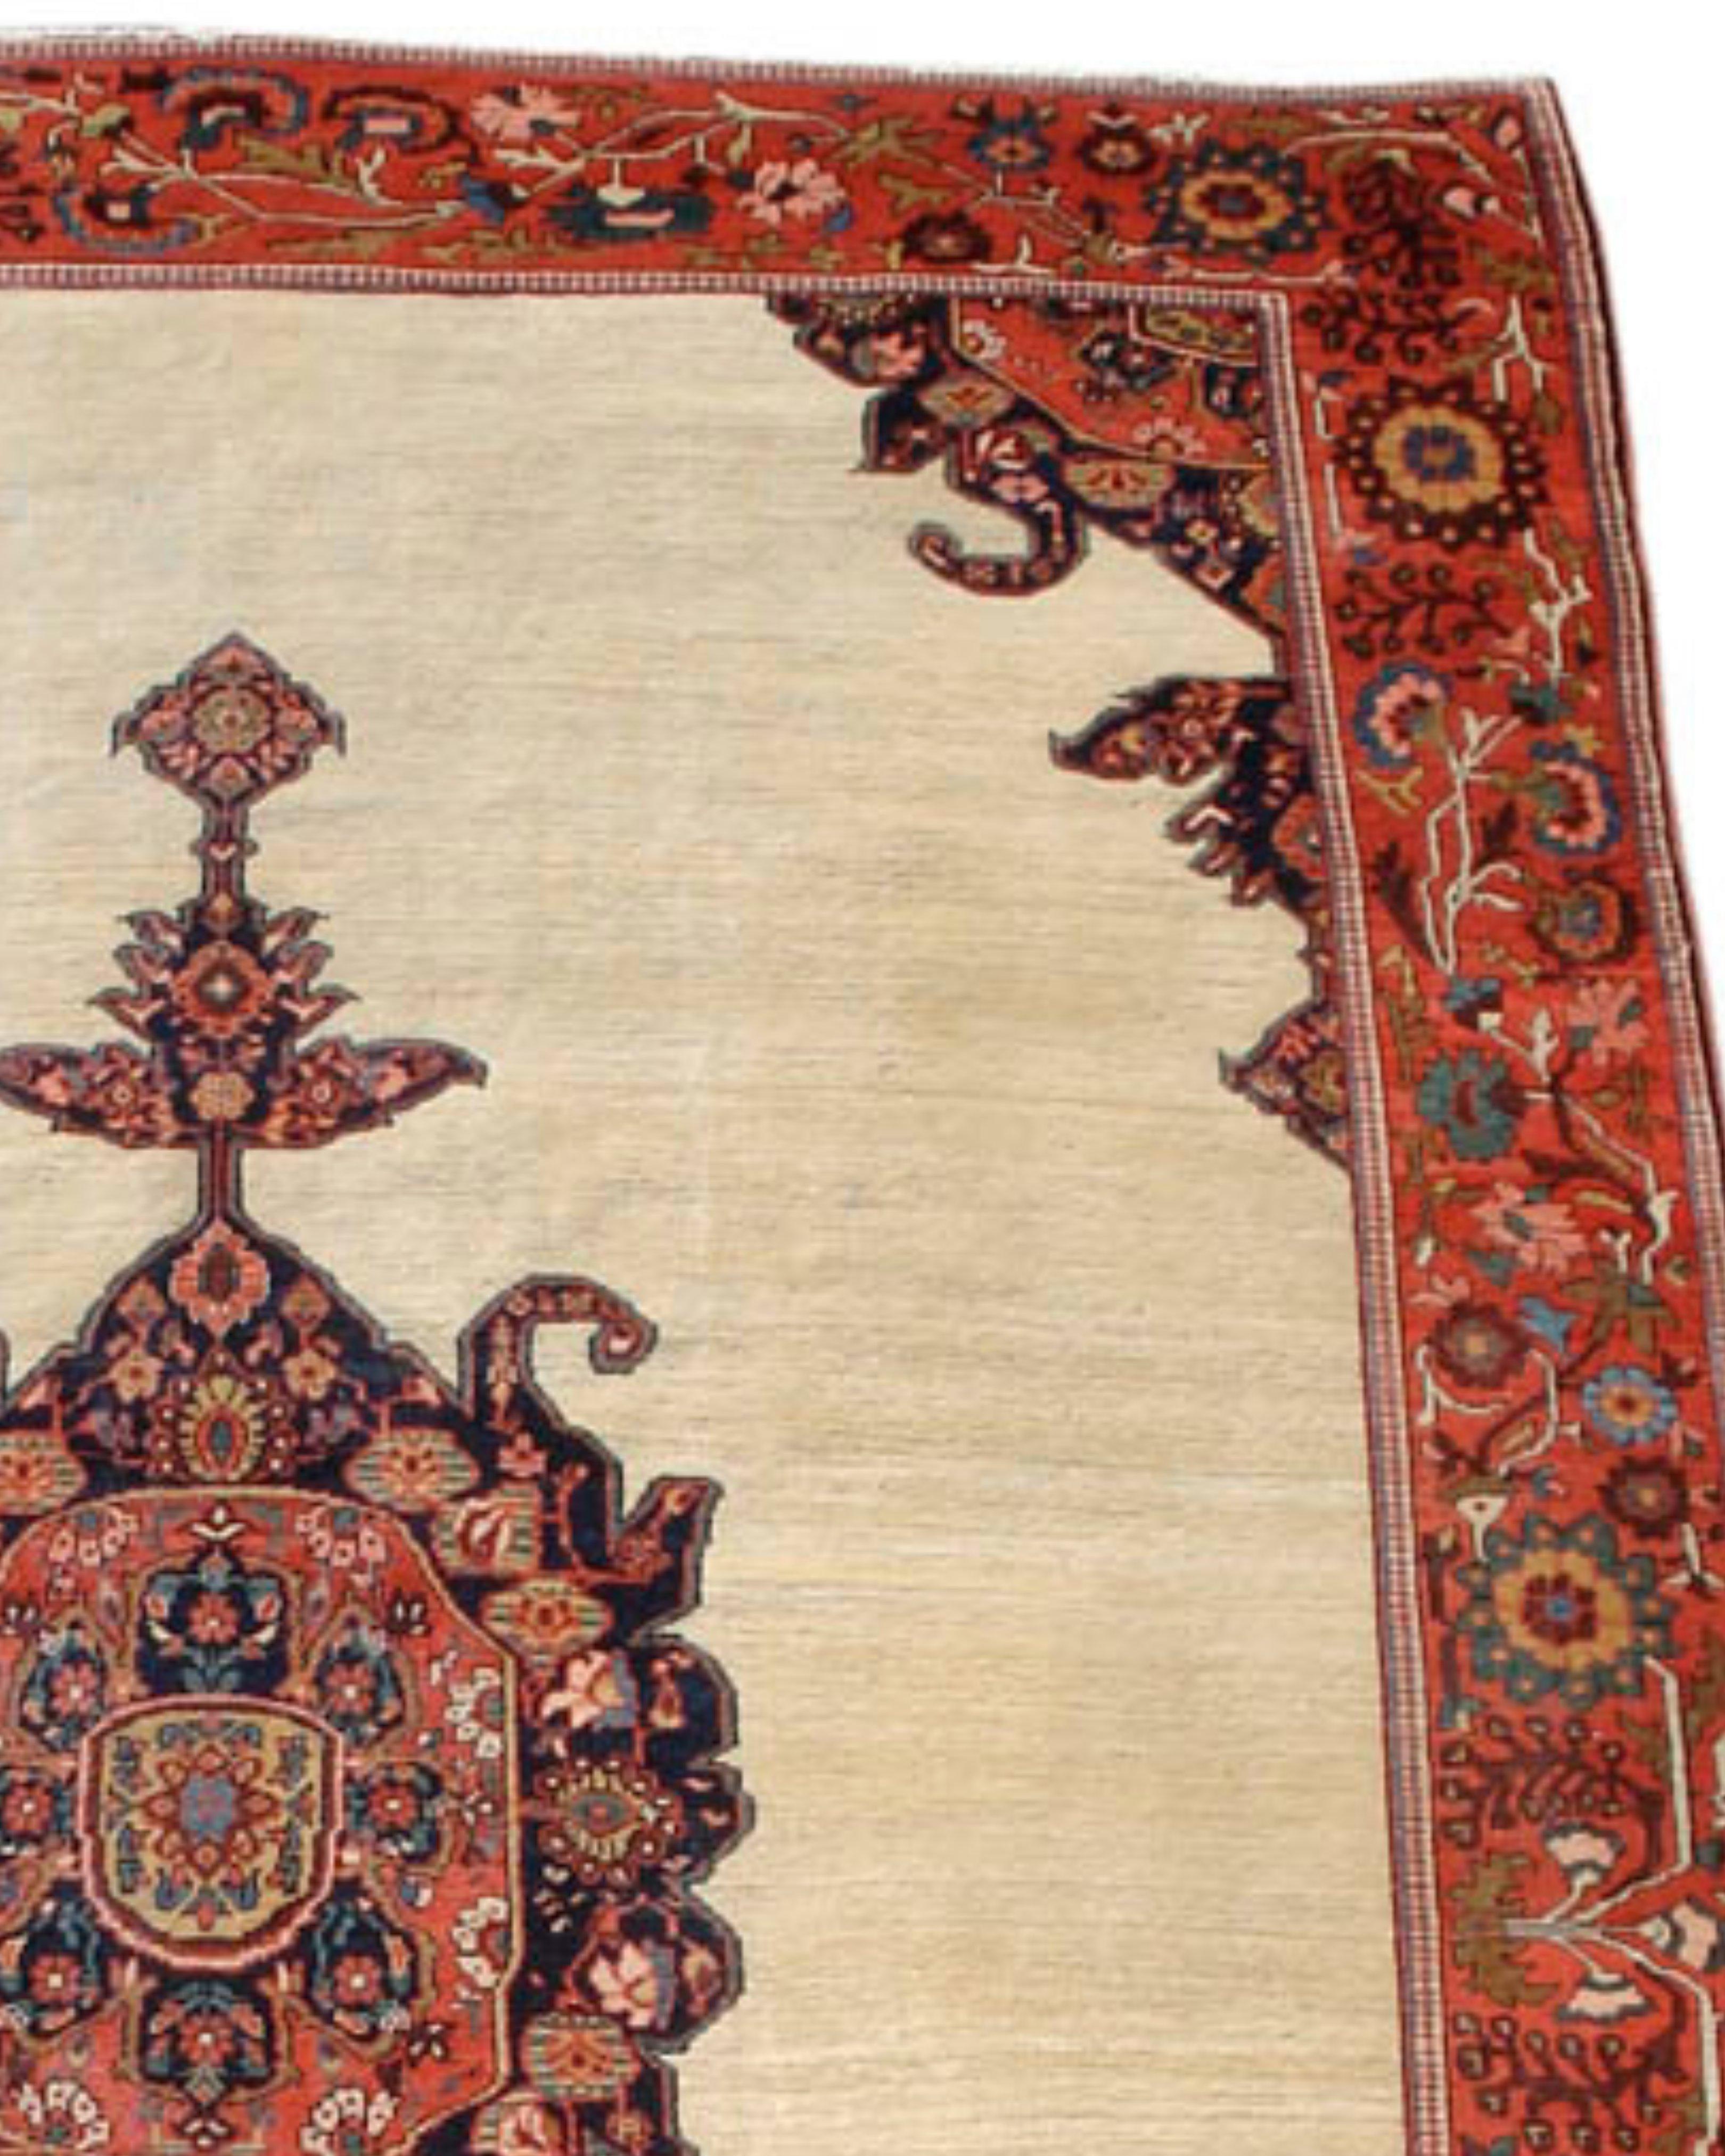 Antique Persian Fereghan Sarouk Rug, 19th Century

With a richly saturated central medallion floating against a clean ivory field, this fine Persian Sarouk exudes elegance. The jewel-like structures of the medallion are individuated and quite